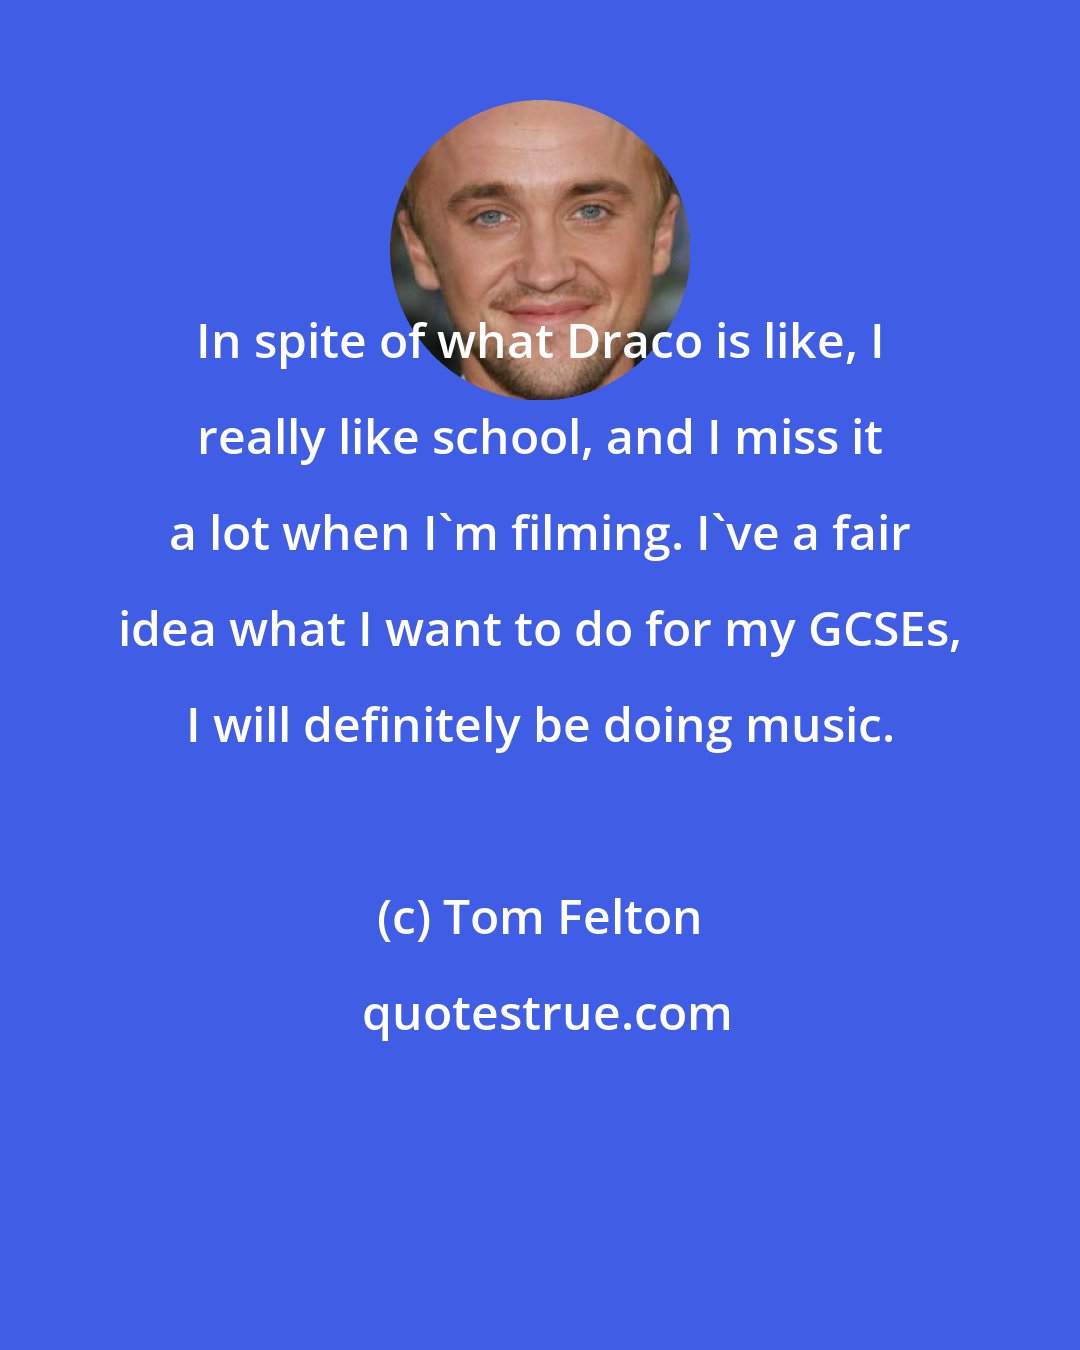 Tom Felton: In spite of what Draco is like, I really like school, and I miss it a lot when I'm filming. I've a fair idea what I want to do for my GCSEs, I will definitely be doing music.